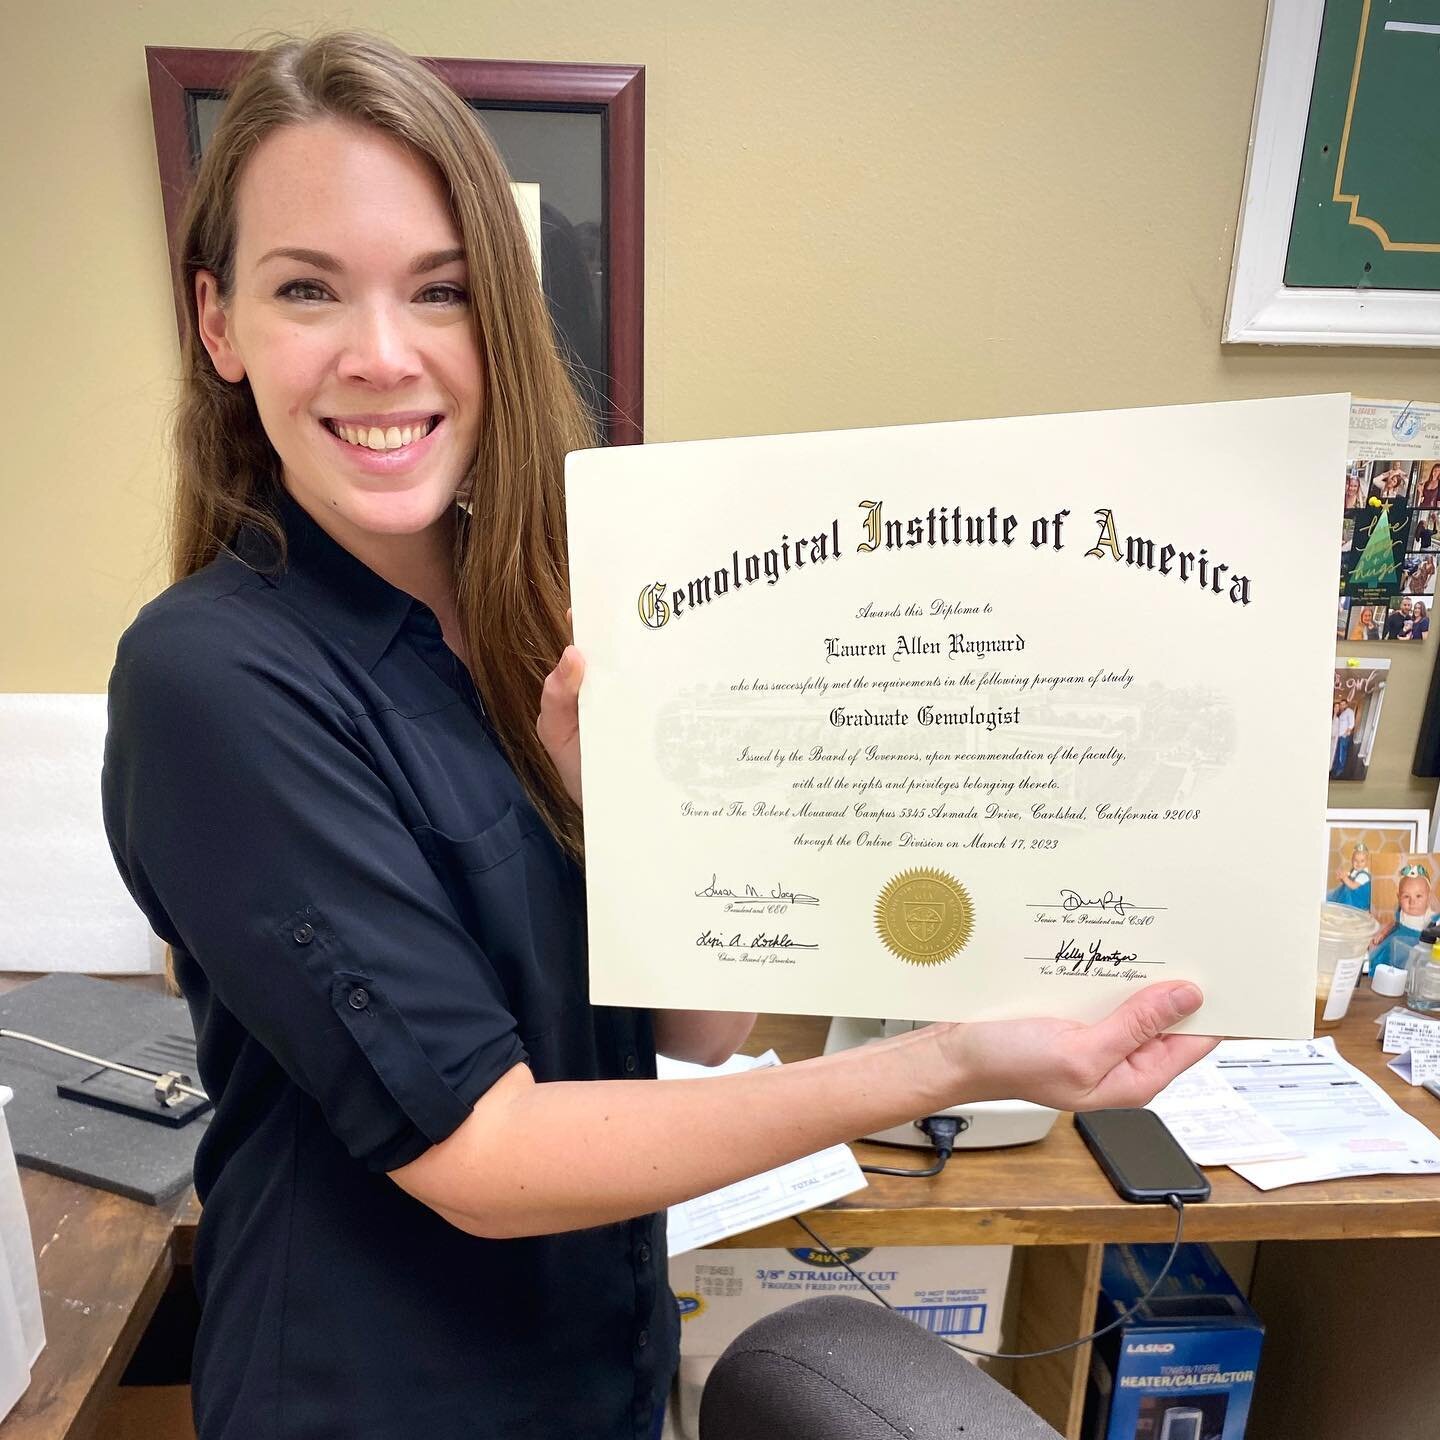 After years of hard work, Lauren is officially a Graduate Gemologist!

She received her degree from GIA, Gemological Institute of America. It&rsquo;s the most prestigious degree you can earn in the jewelry industry. She looks forward to sharing her k